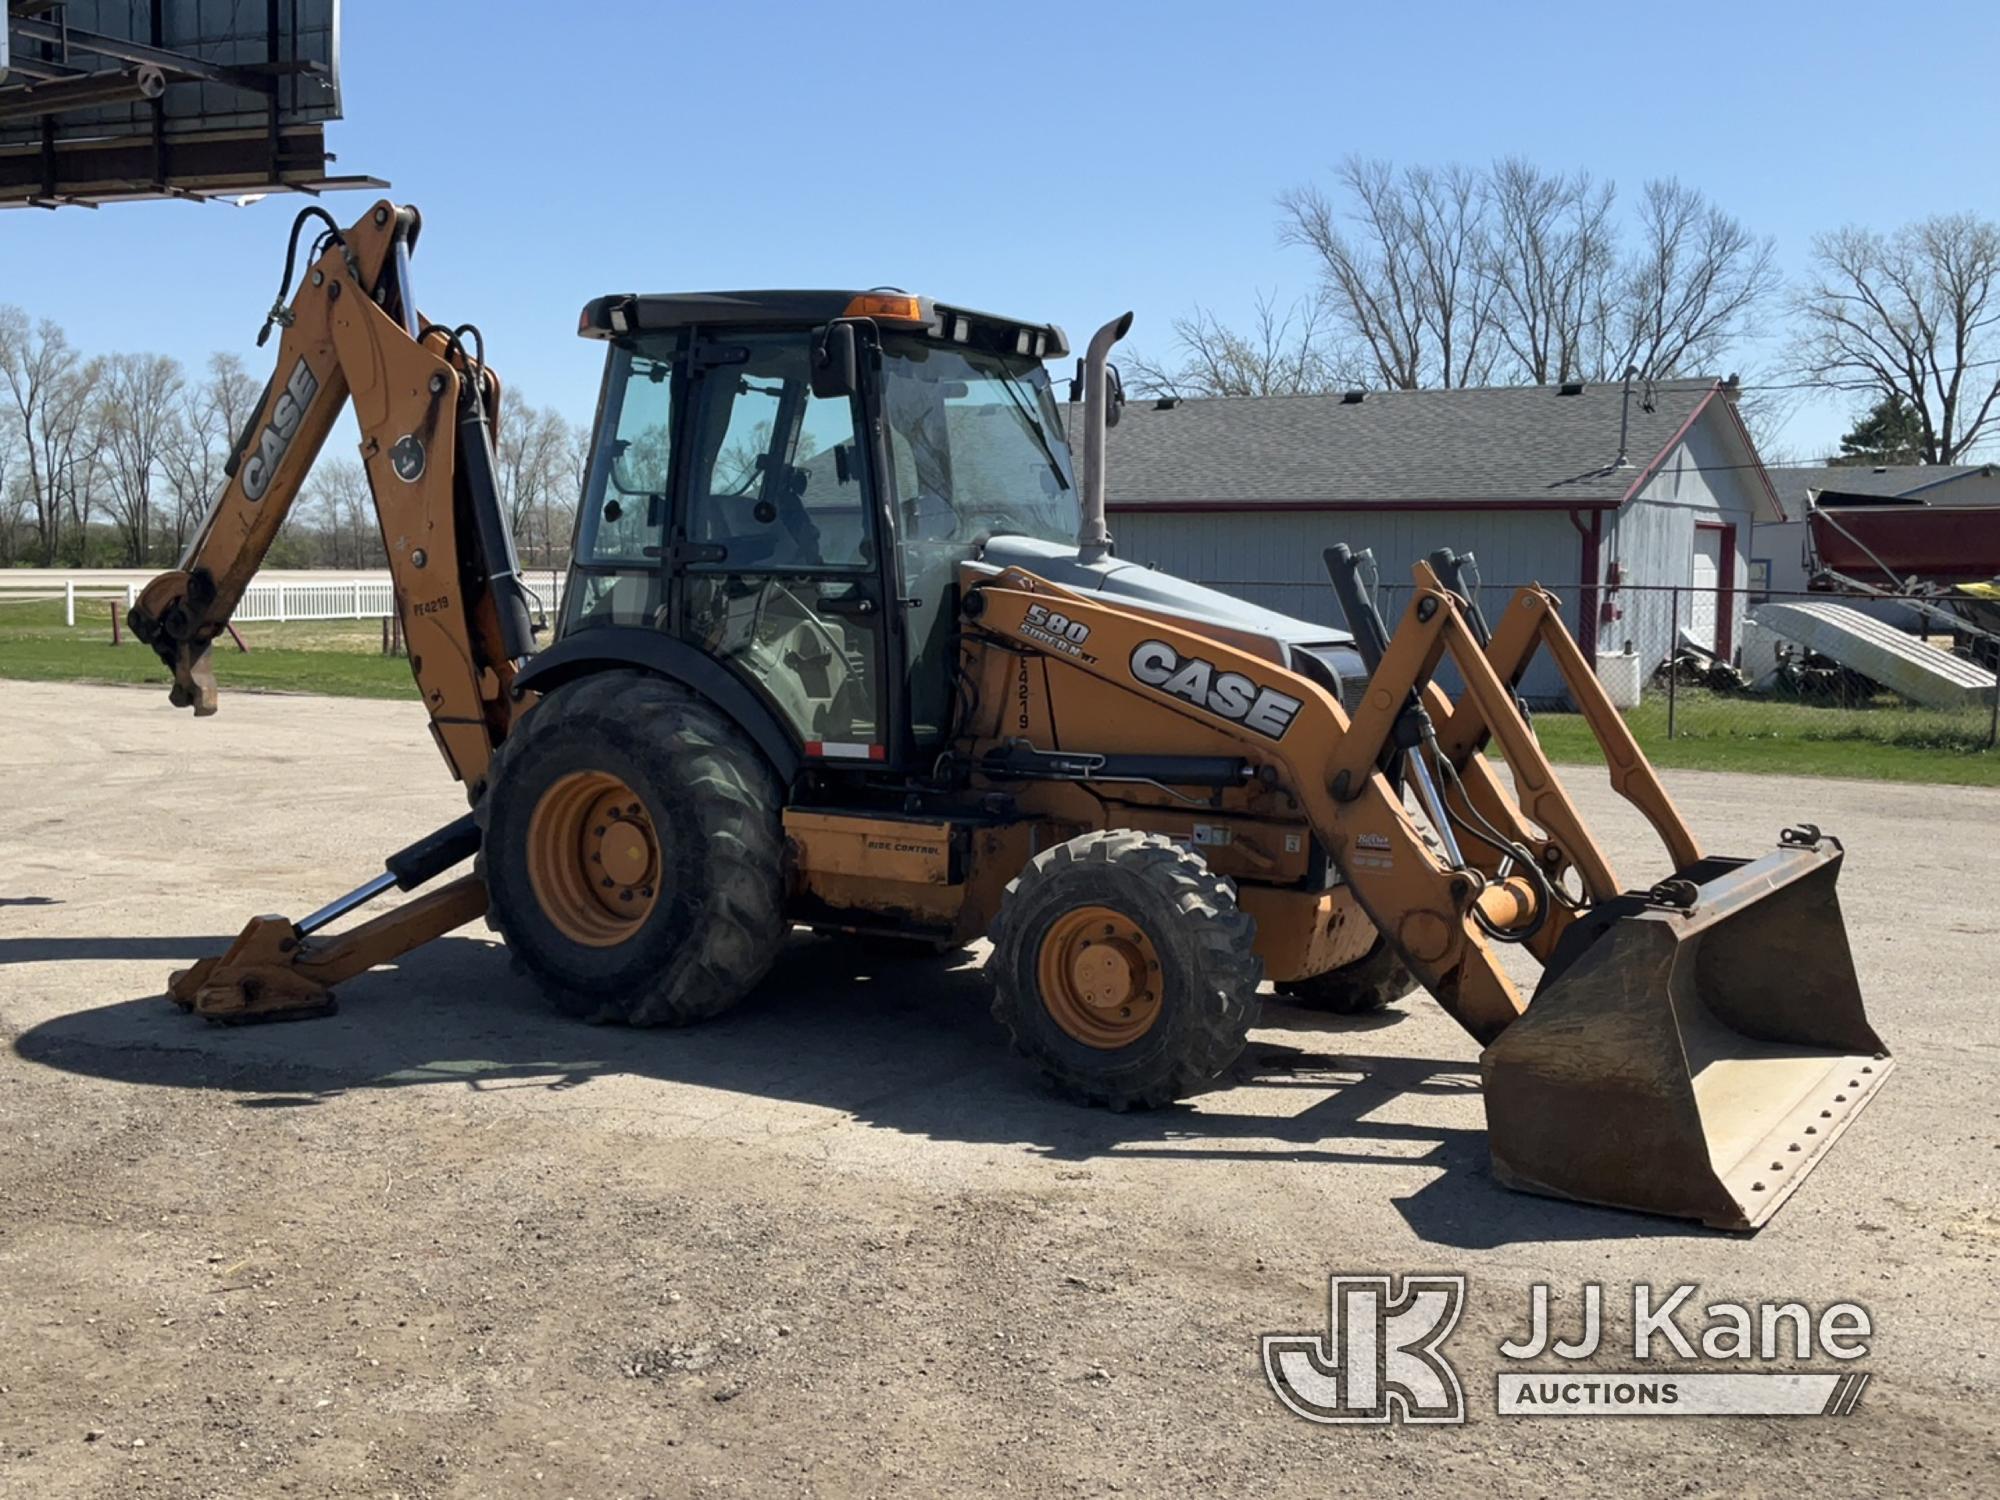 (South Beloit, IL) 2014 Case 580 Tractor Loader Backhoe Runs & Operates) (Rough Idle-Condition Unkno